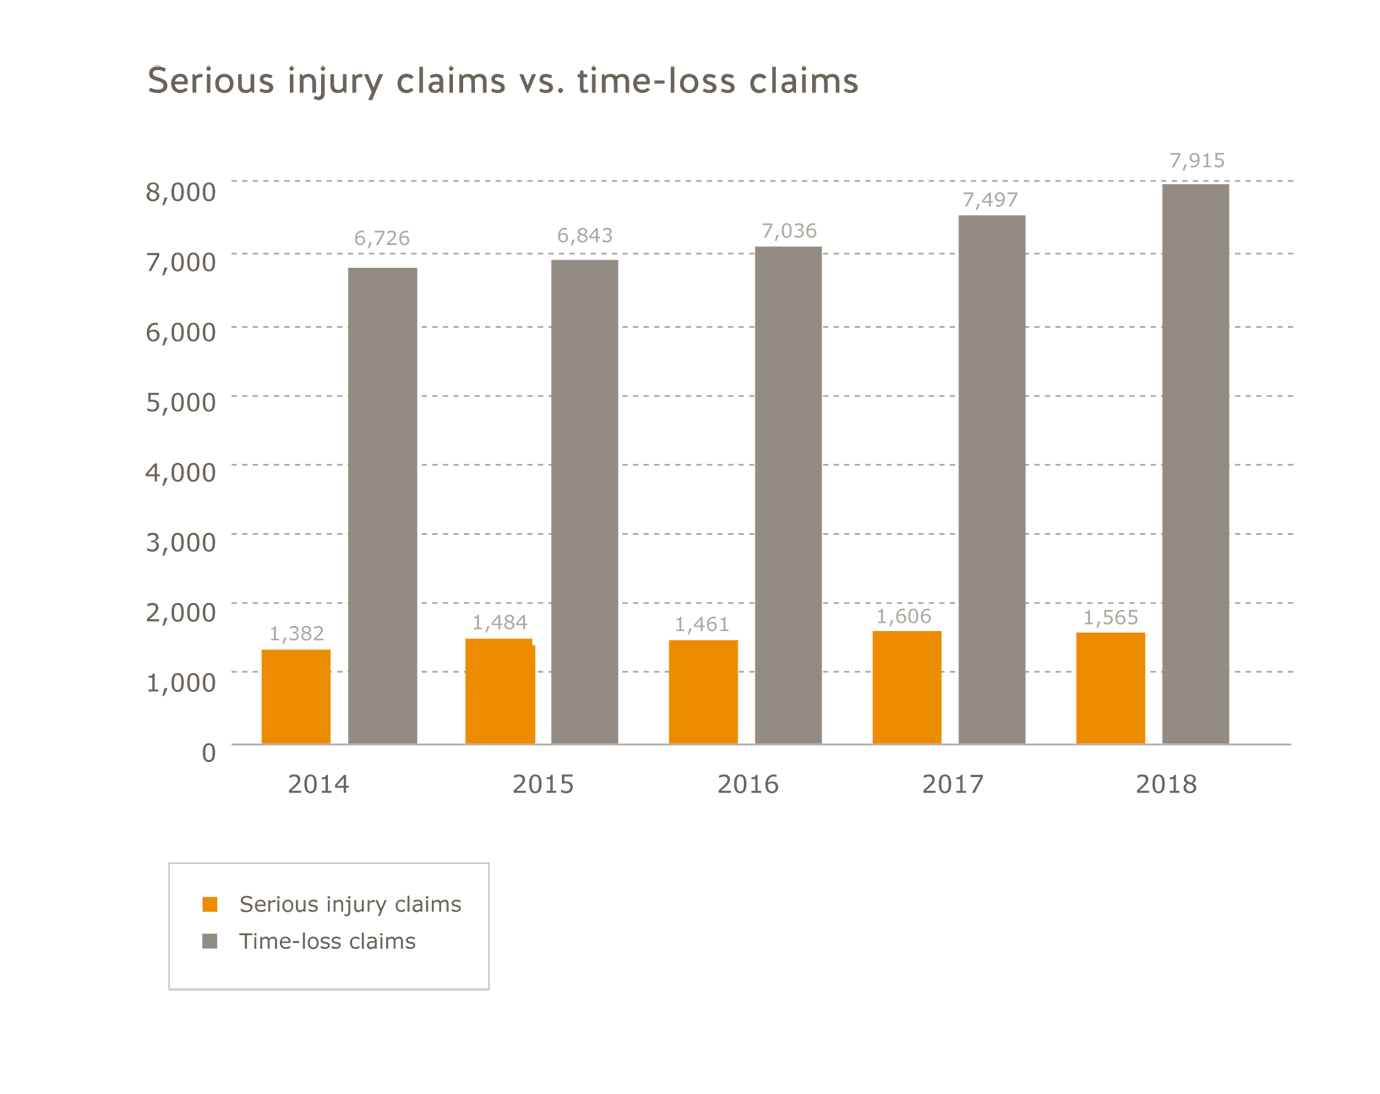 Construction sector serious injury claims vs. time-loss claims for 2014 to 2018. Serious injury claims: 2014=1,382; 2015=1,484; 2016=1,461; 2017=1,606; 2018=1,565. Time-loss claims: 2014=6,726; 2015=6,843; 2016=7,036; 2017=7,497; 2018=7,915.